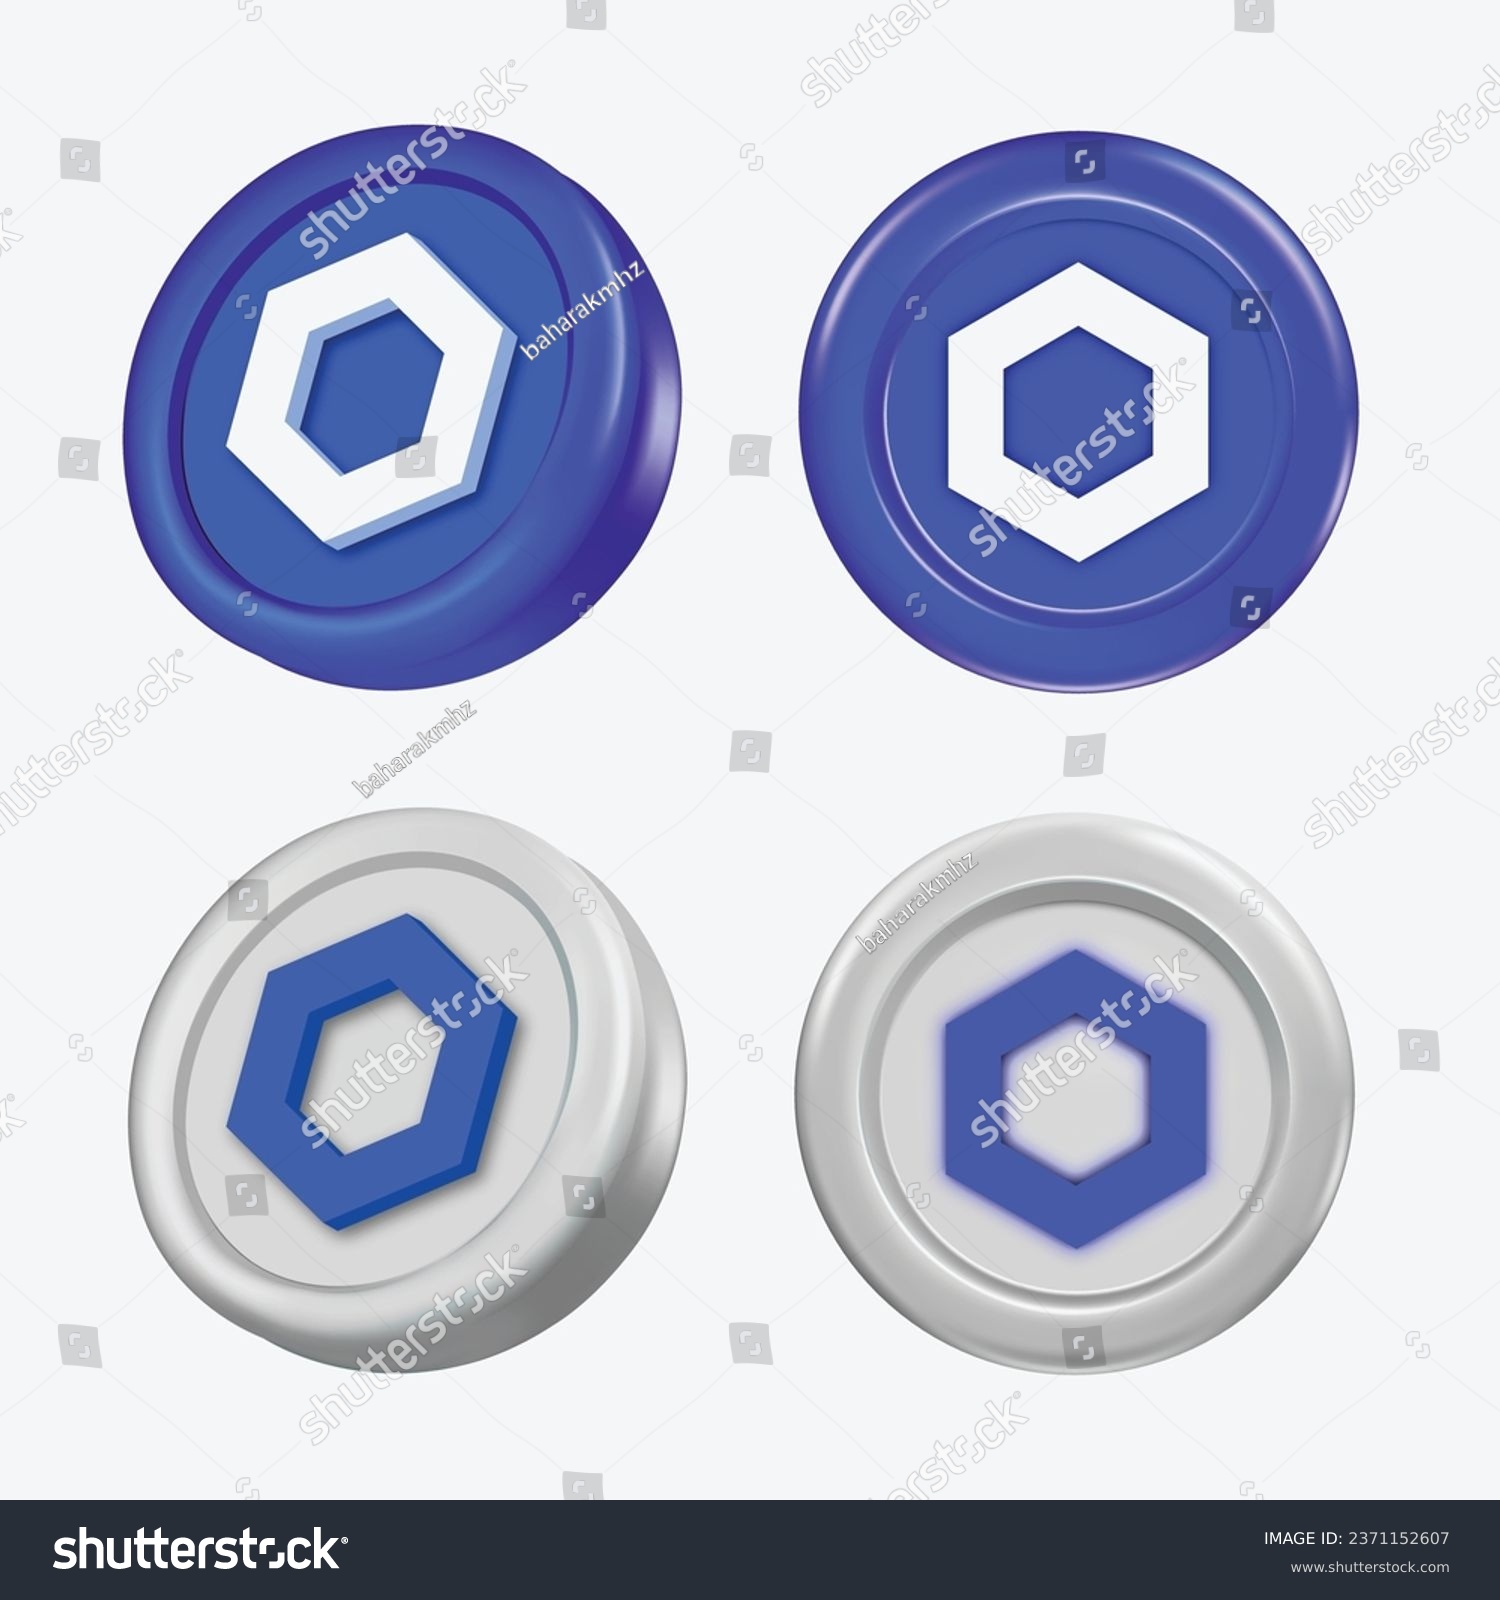 SVG of 3d Chainlink Cryptocurrency Coin (LINK
) on white background. Vector illustration svg